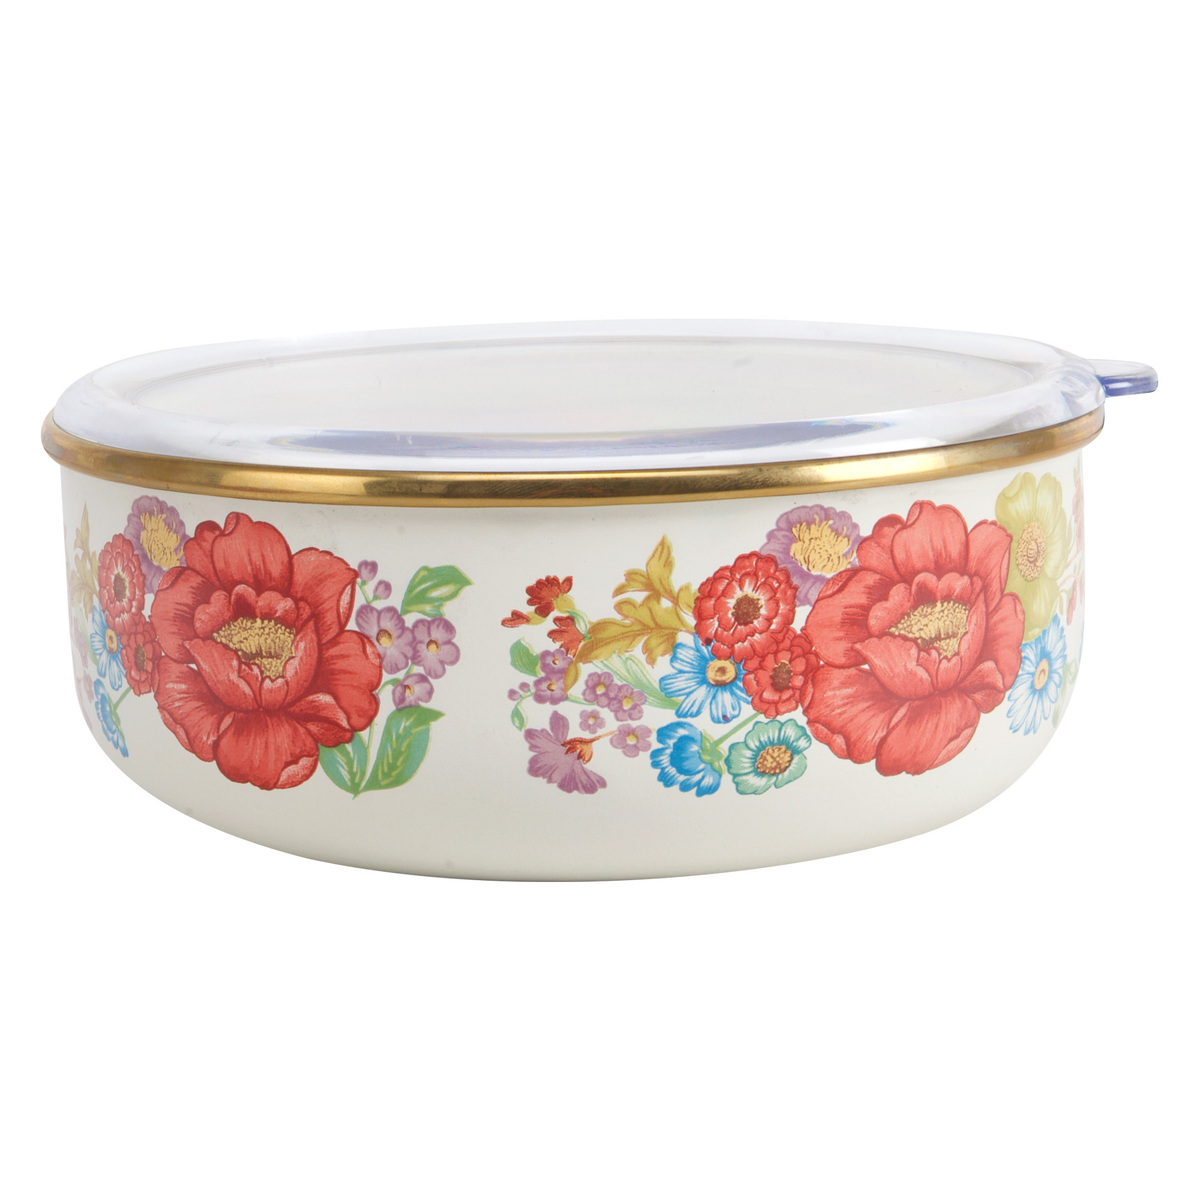 Chefline Enamel Food Container, Large, Assorted